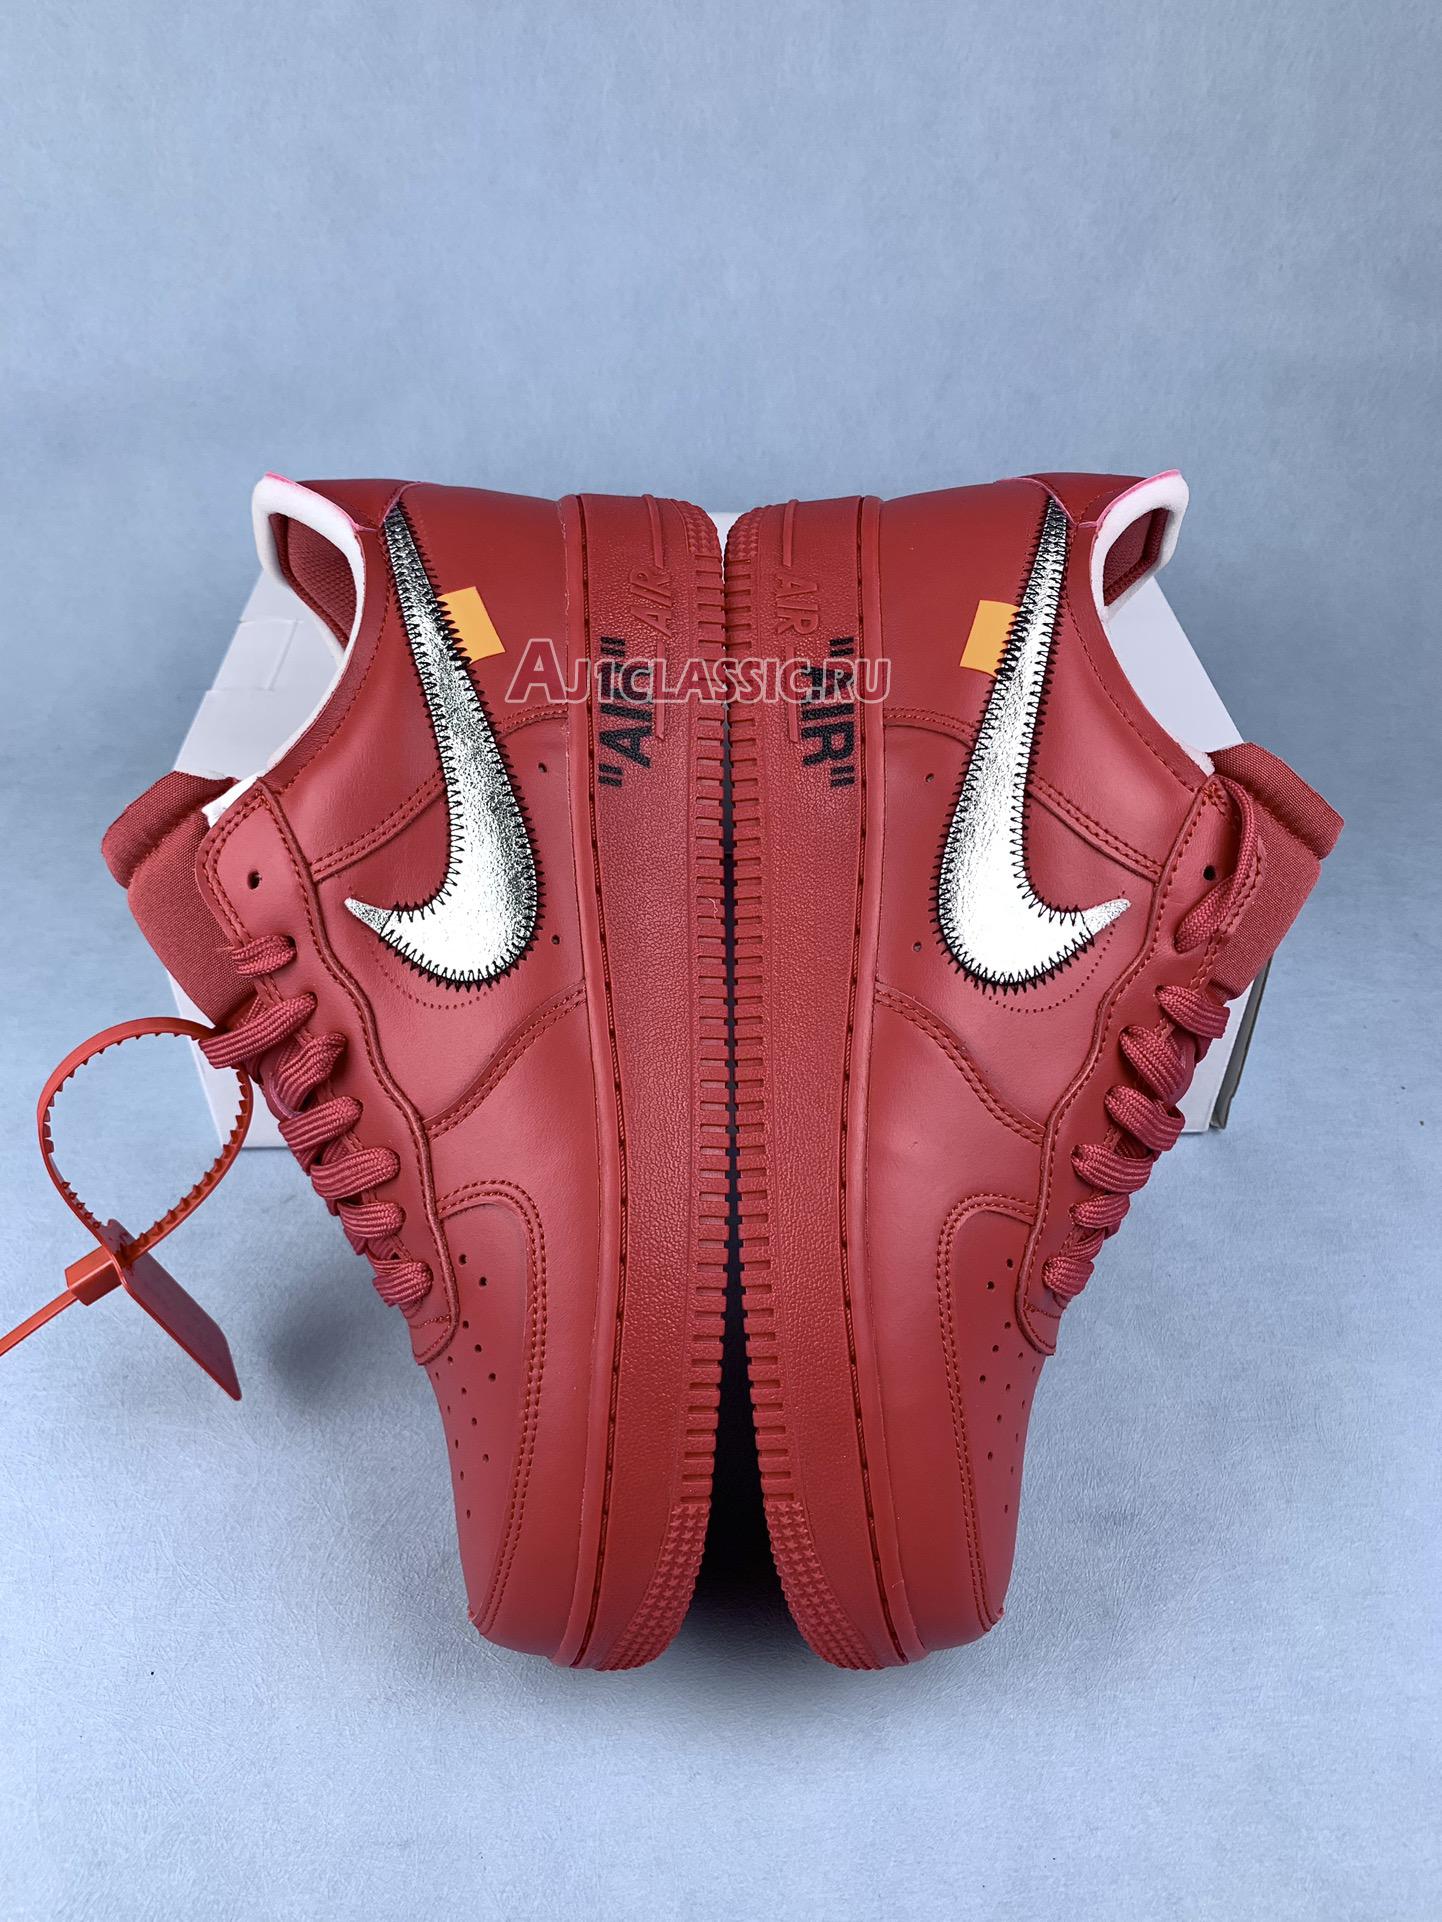 Off-White x Nike Air Force 1 Low "Brick Red" AO4297-600